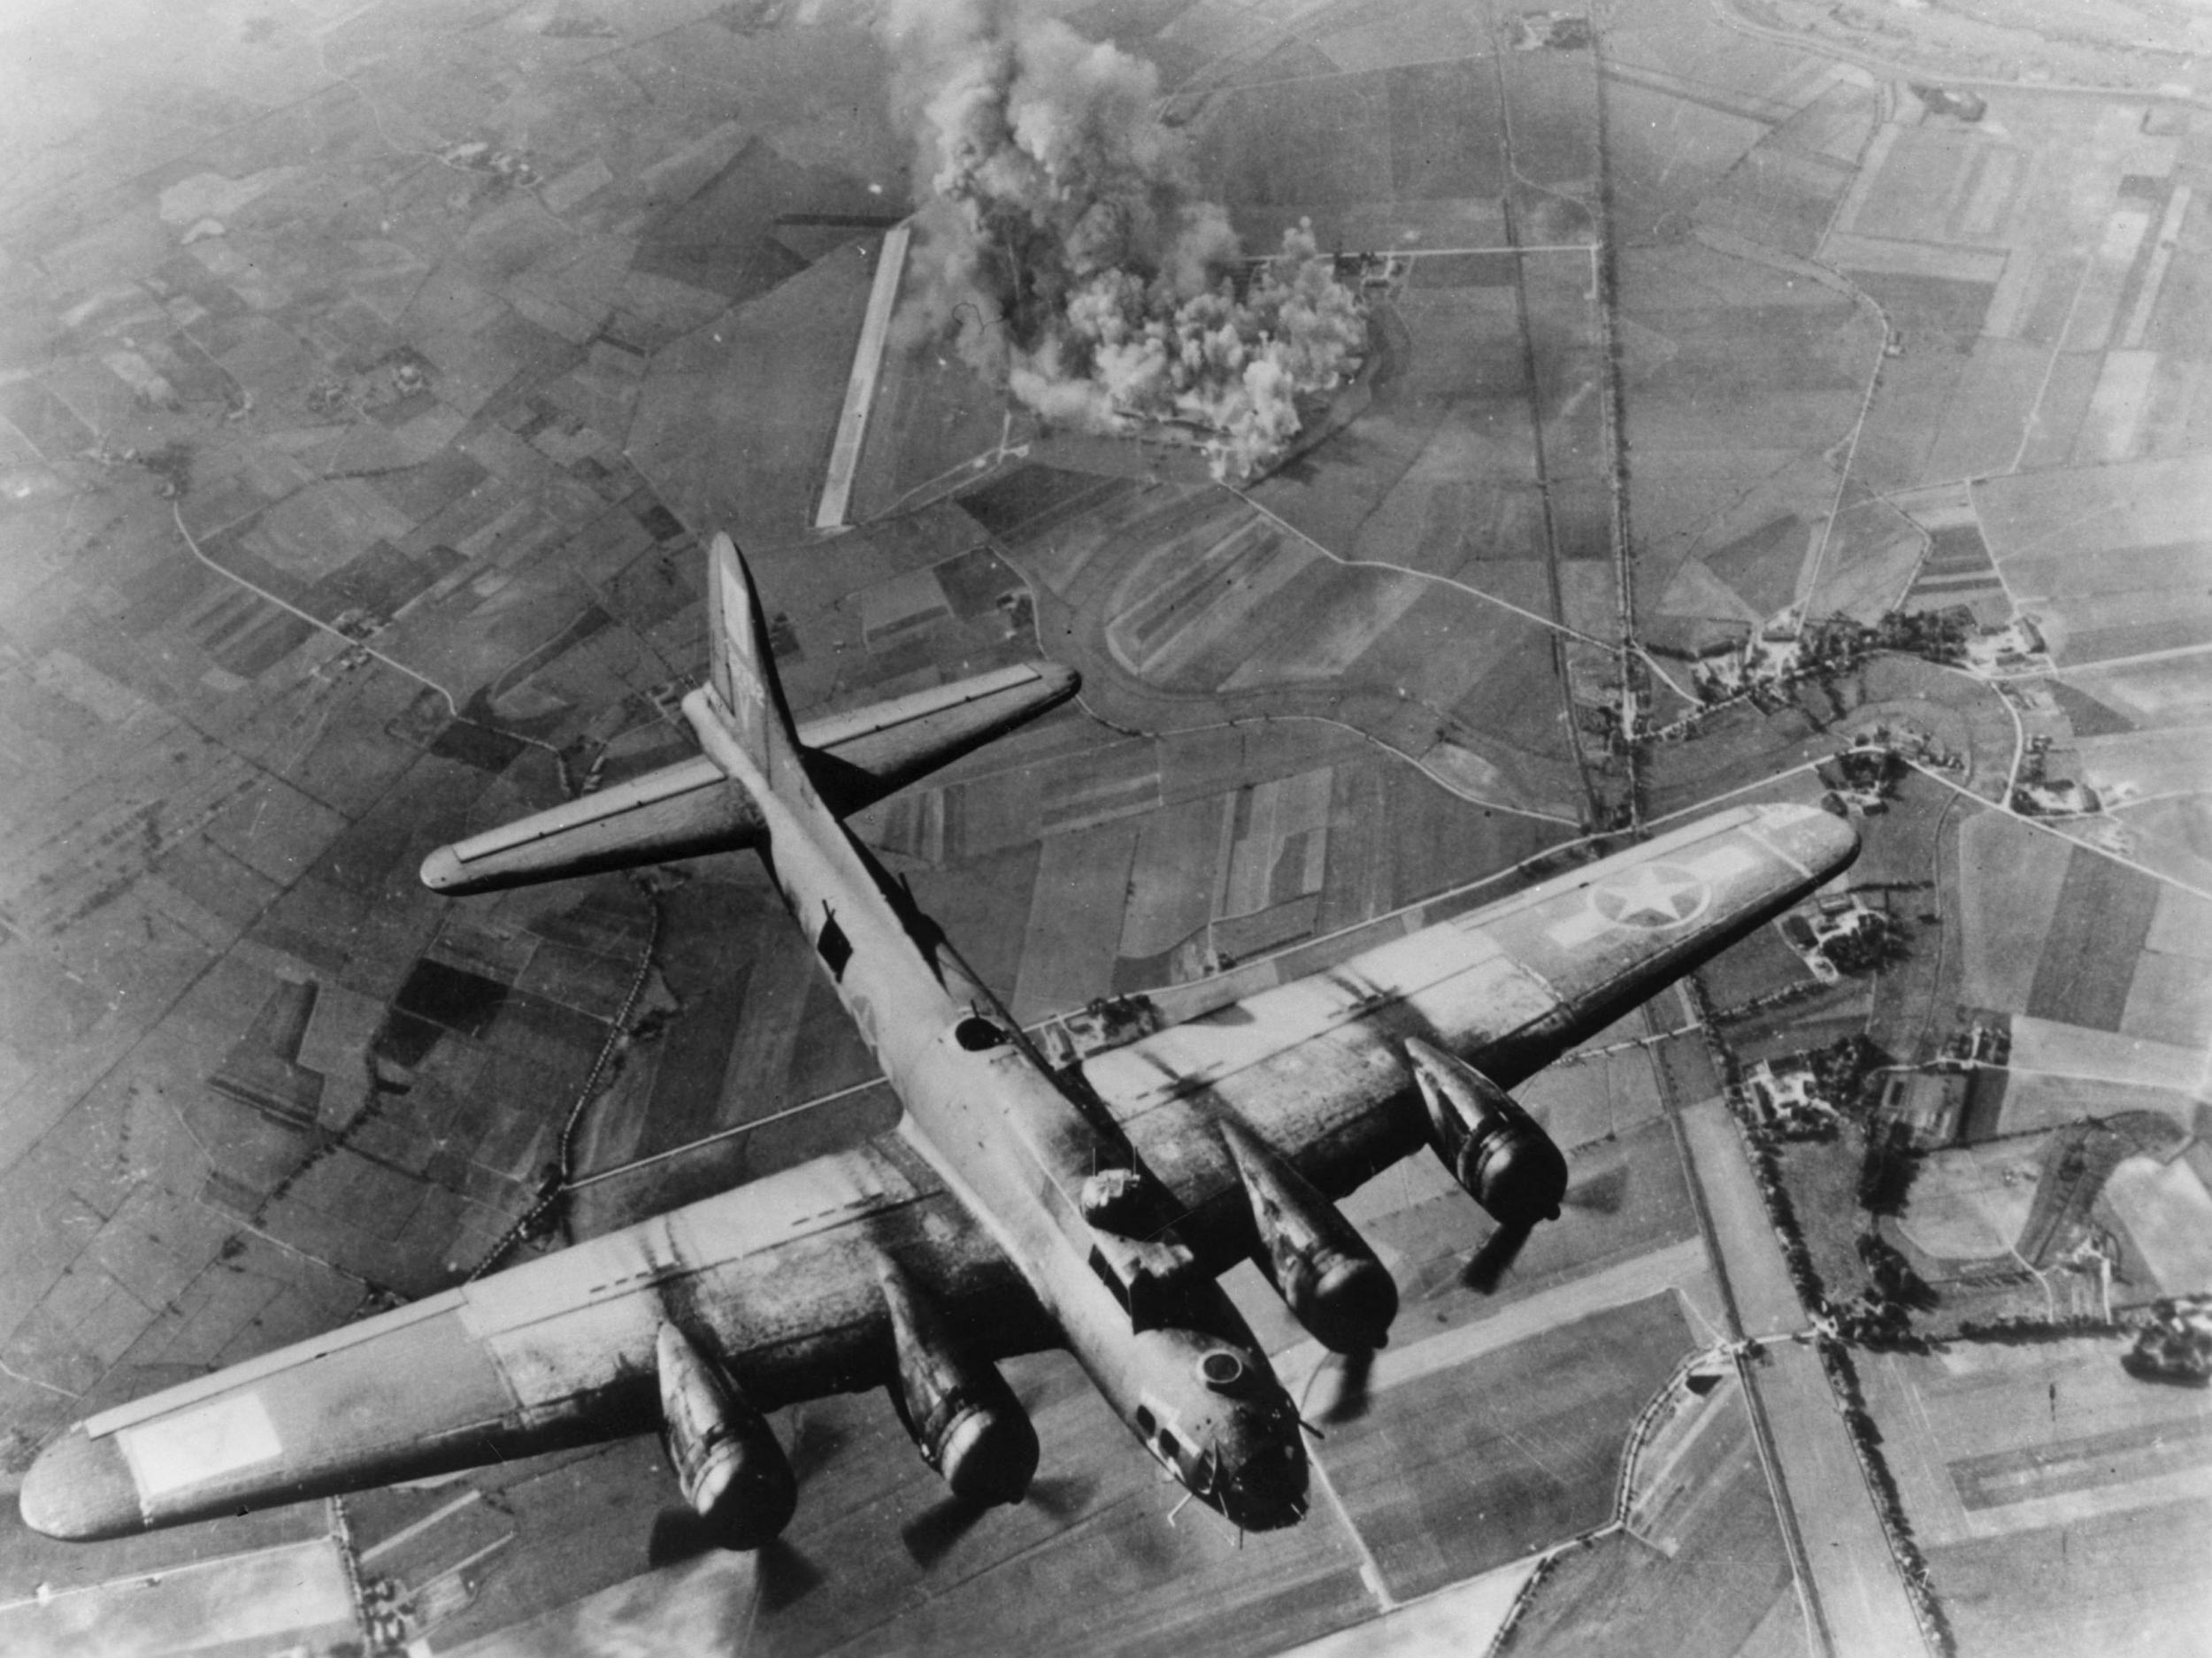 US bomber Memphis Belle captured on its final mission over Germany by William Wyler